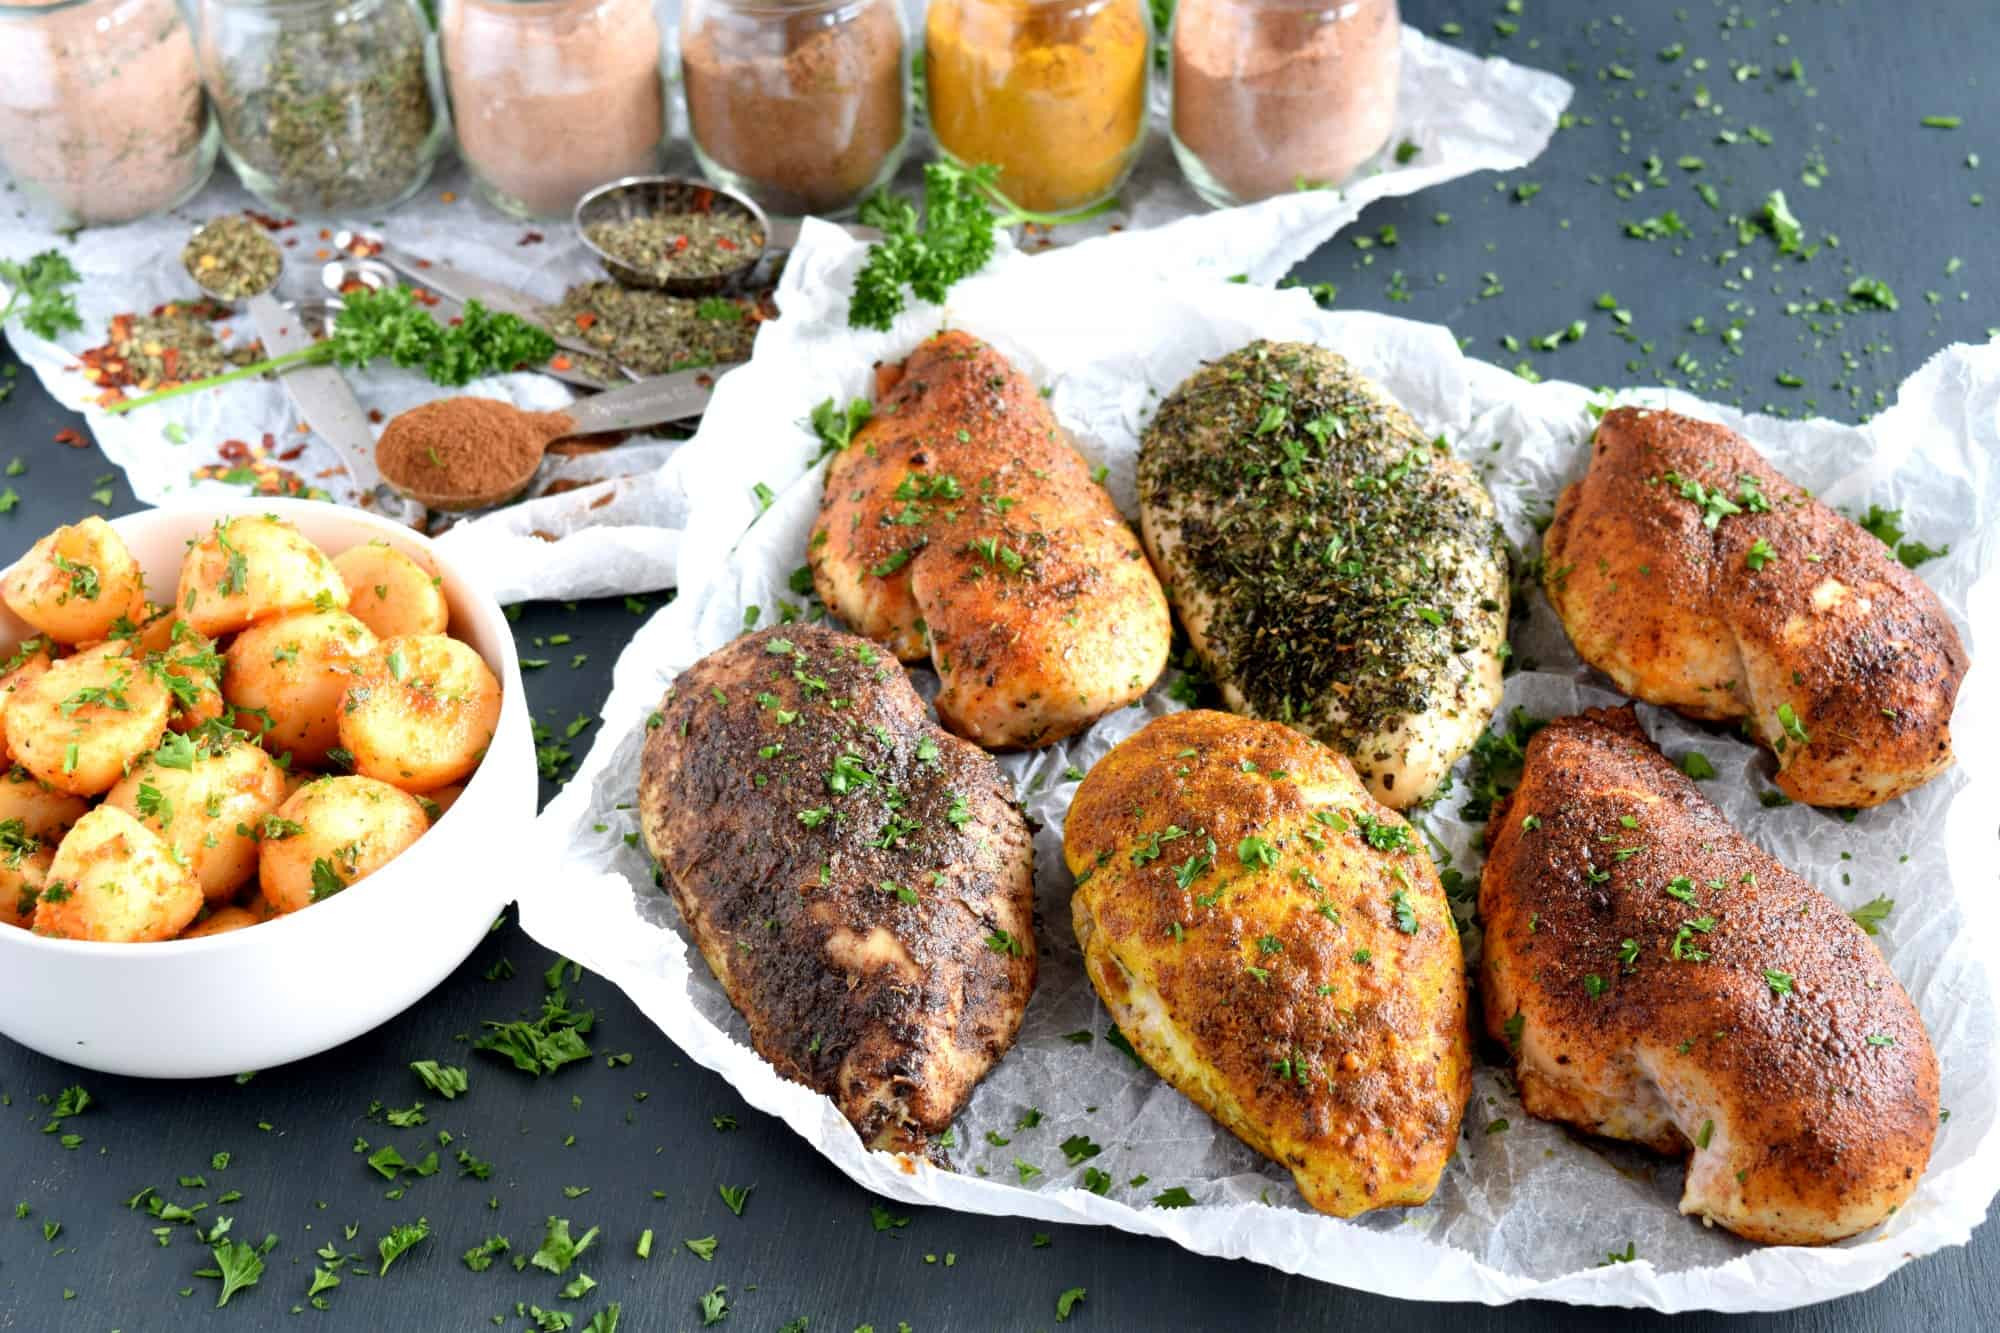 Baked Chicken Seasoning
 6 Seasoning Blends for Baked Chicken Lord Byron s Kitchen